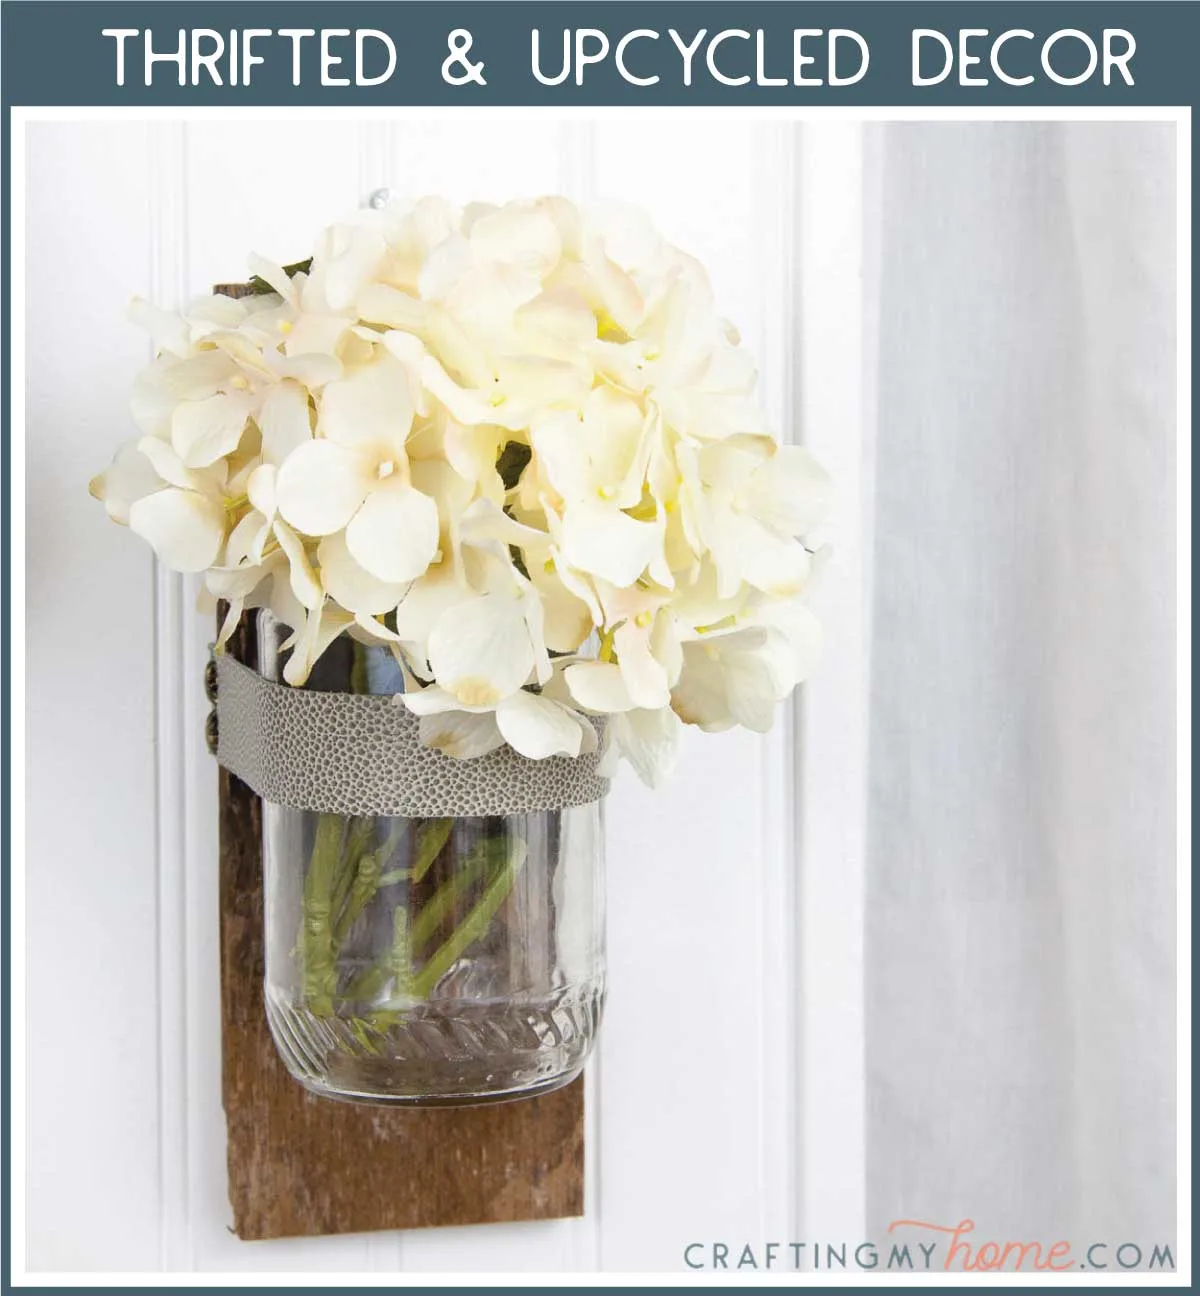 Wall vase made from upcycled items holding flowers with a navy box around it and white text: Thrifted & Upcycled Decor.